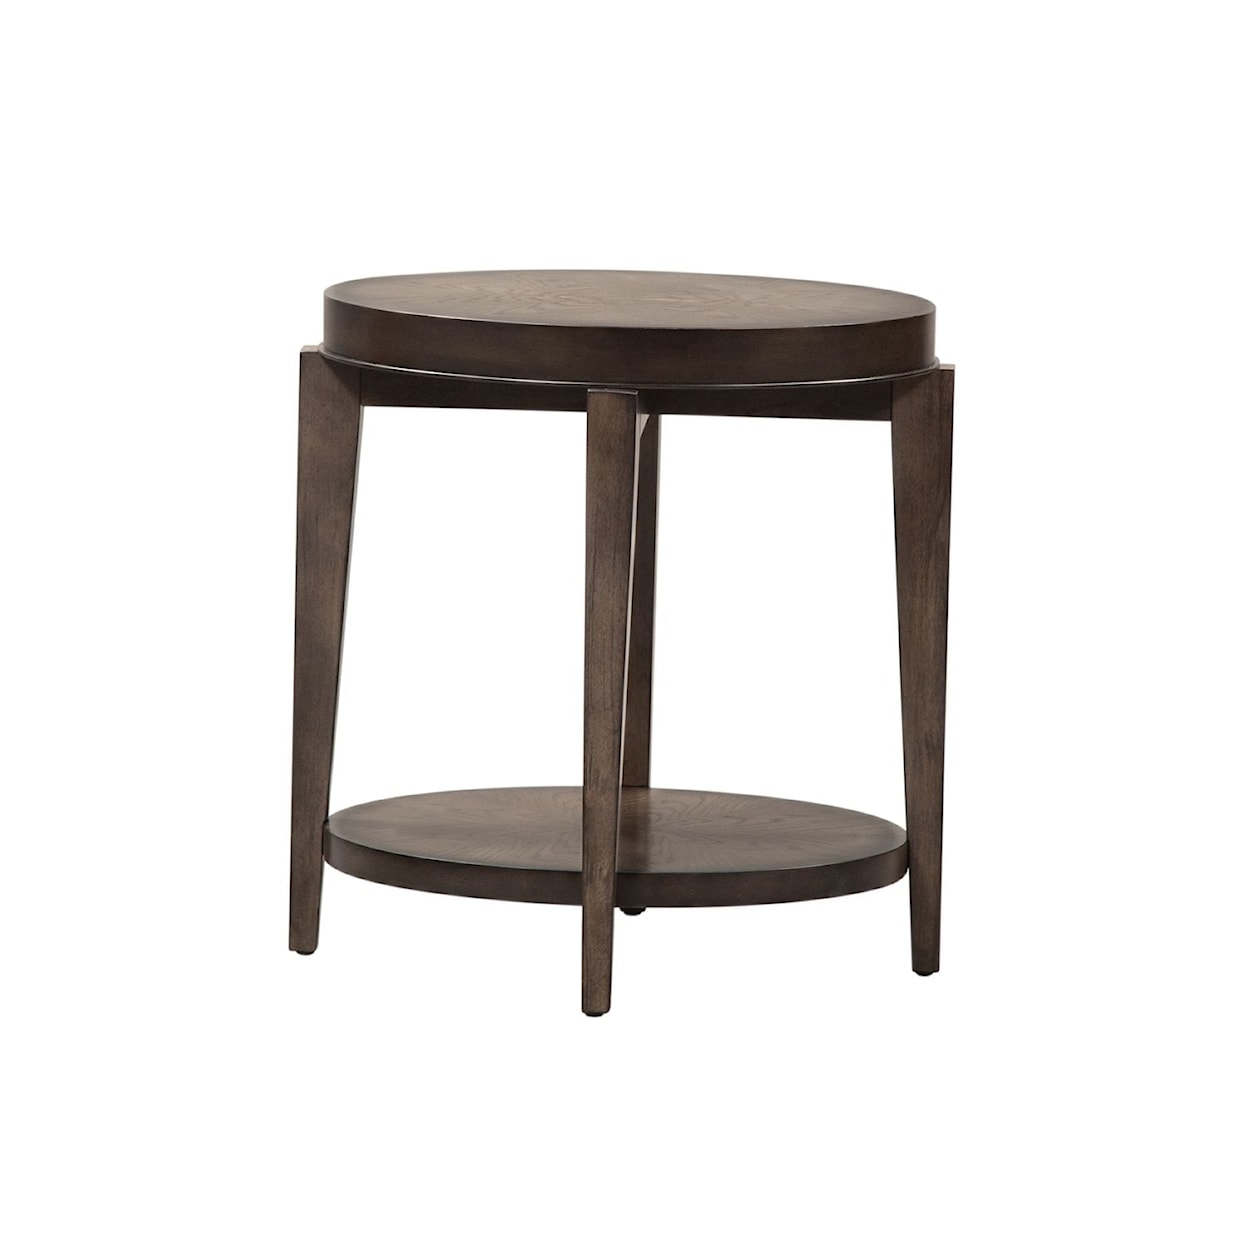 Libby EARHART Chairside Table